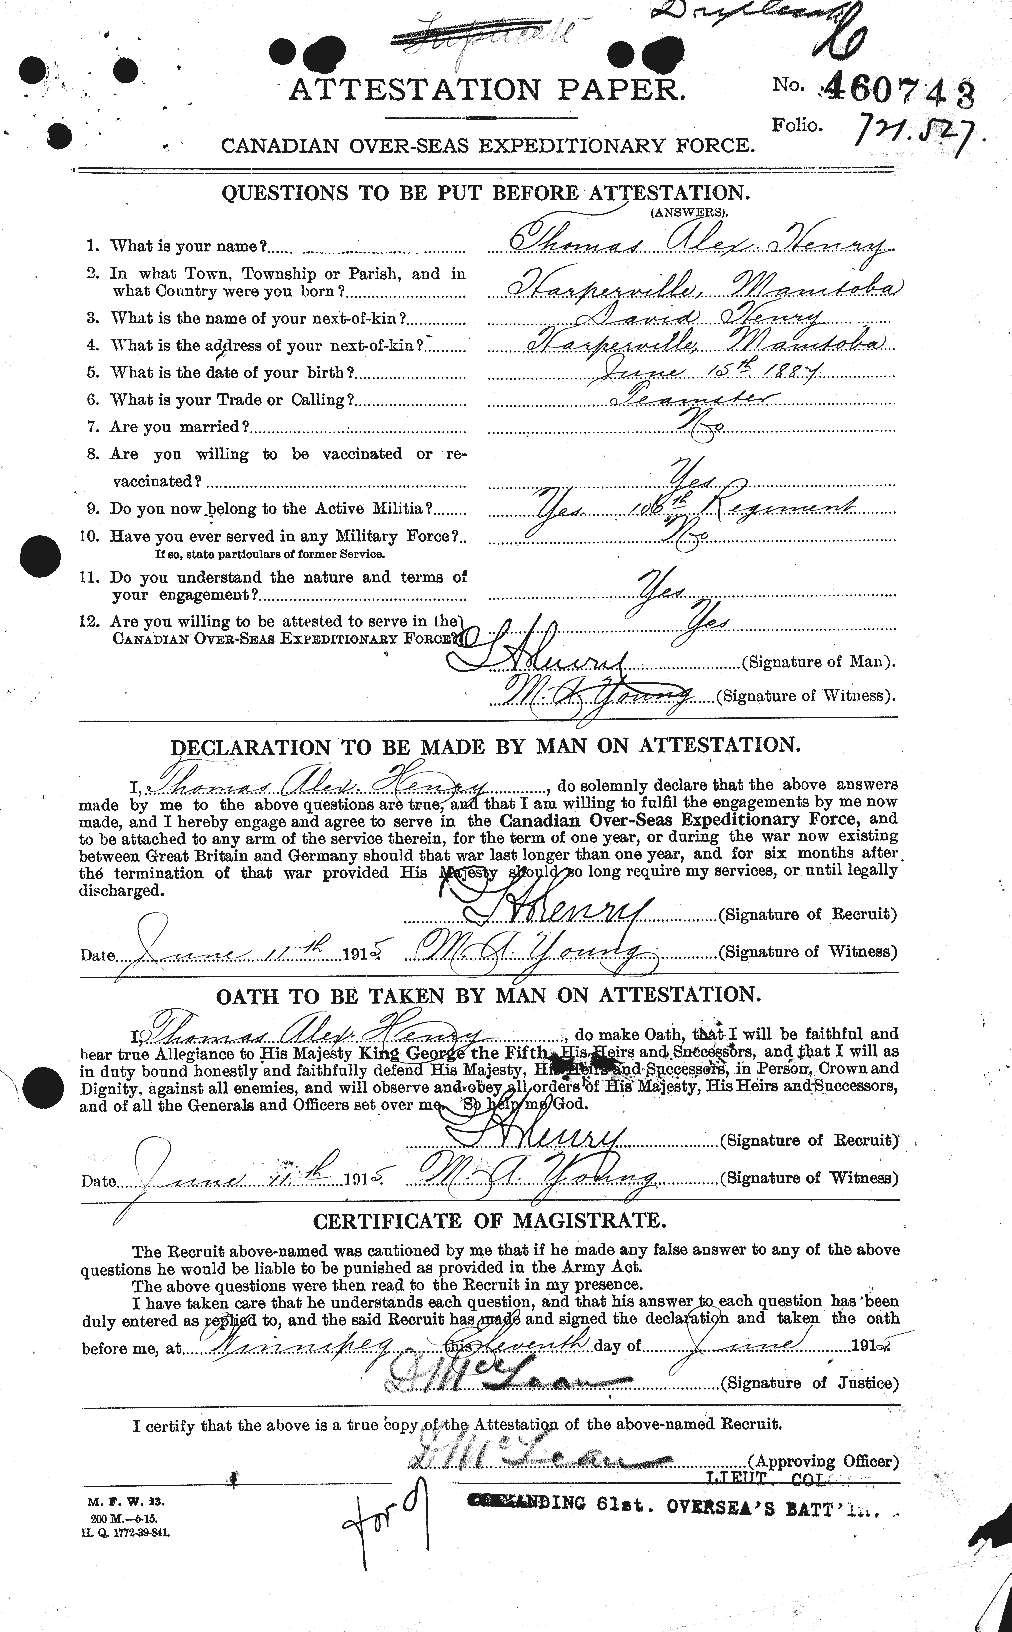 Personnel Records of the First World War - CEF 387733a